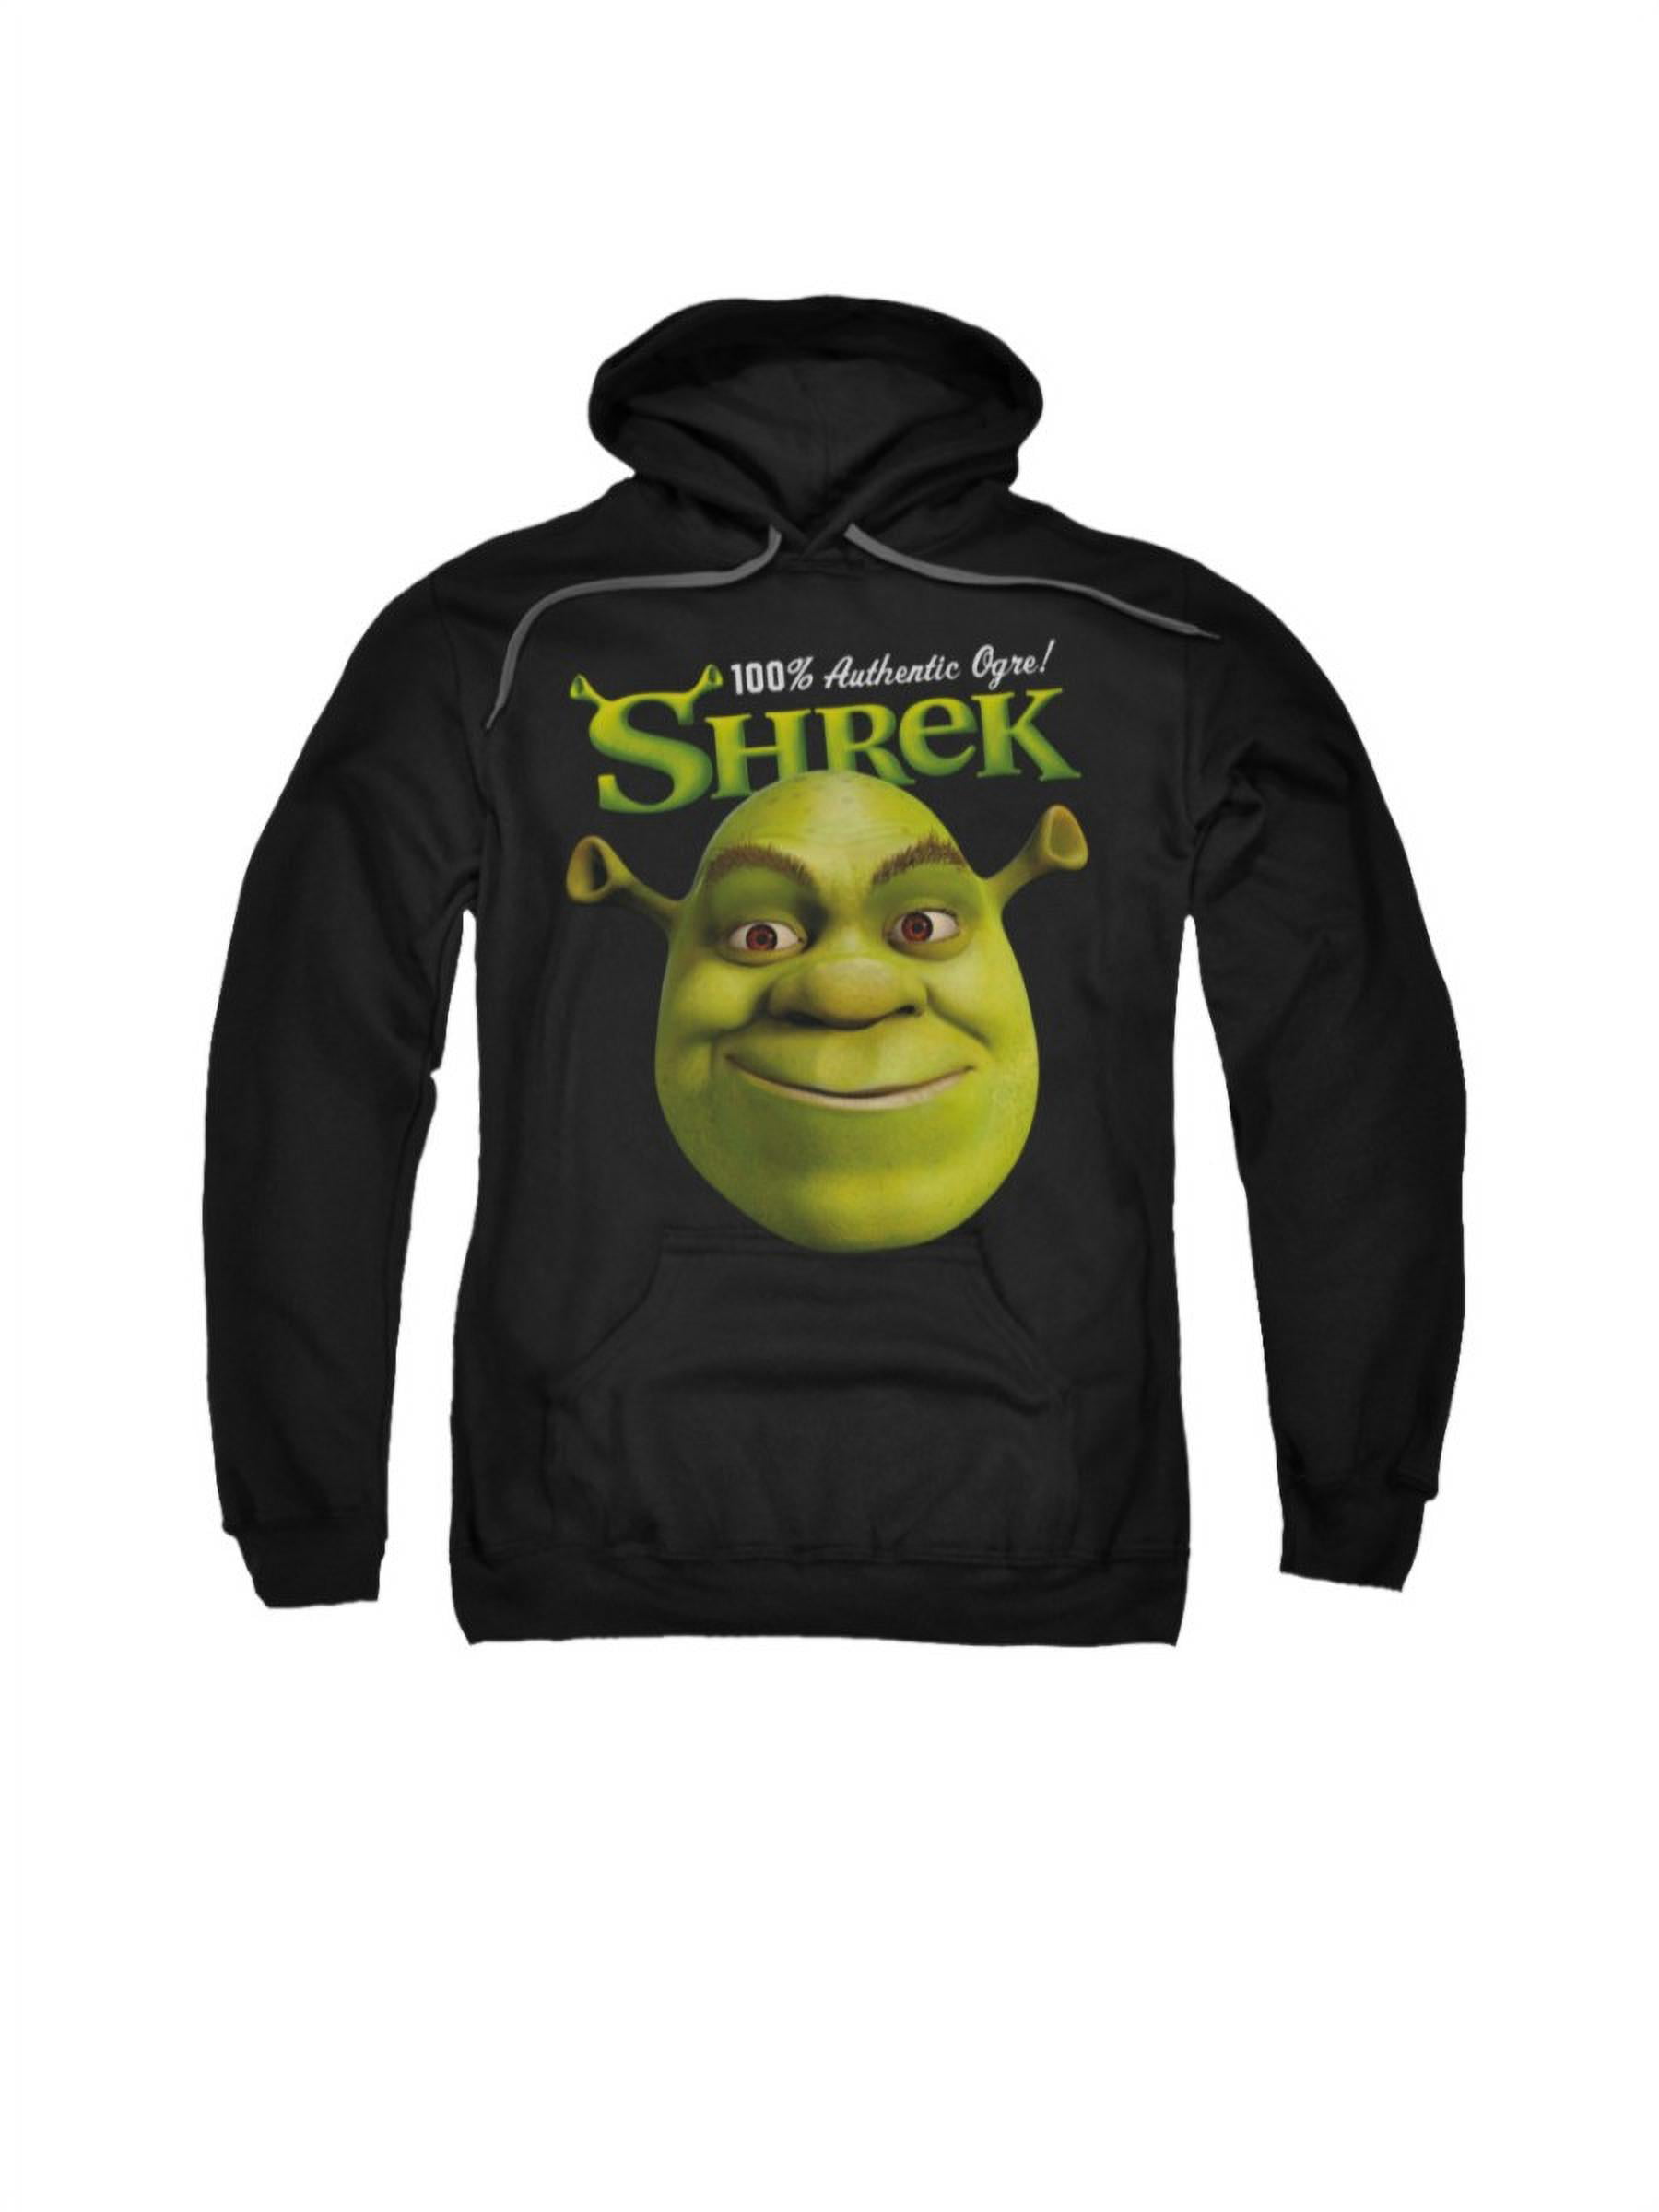 Shrek Animated Children's Comedy Movie Authentic Ogre Adult Pull-Over  Hoodie 